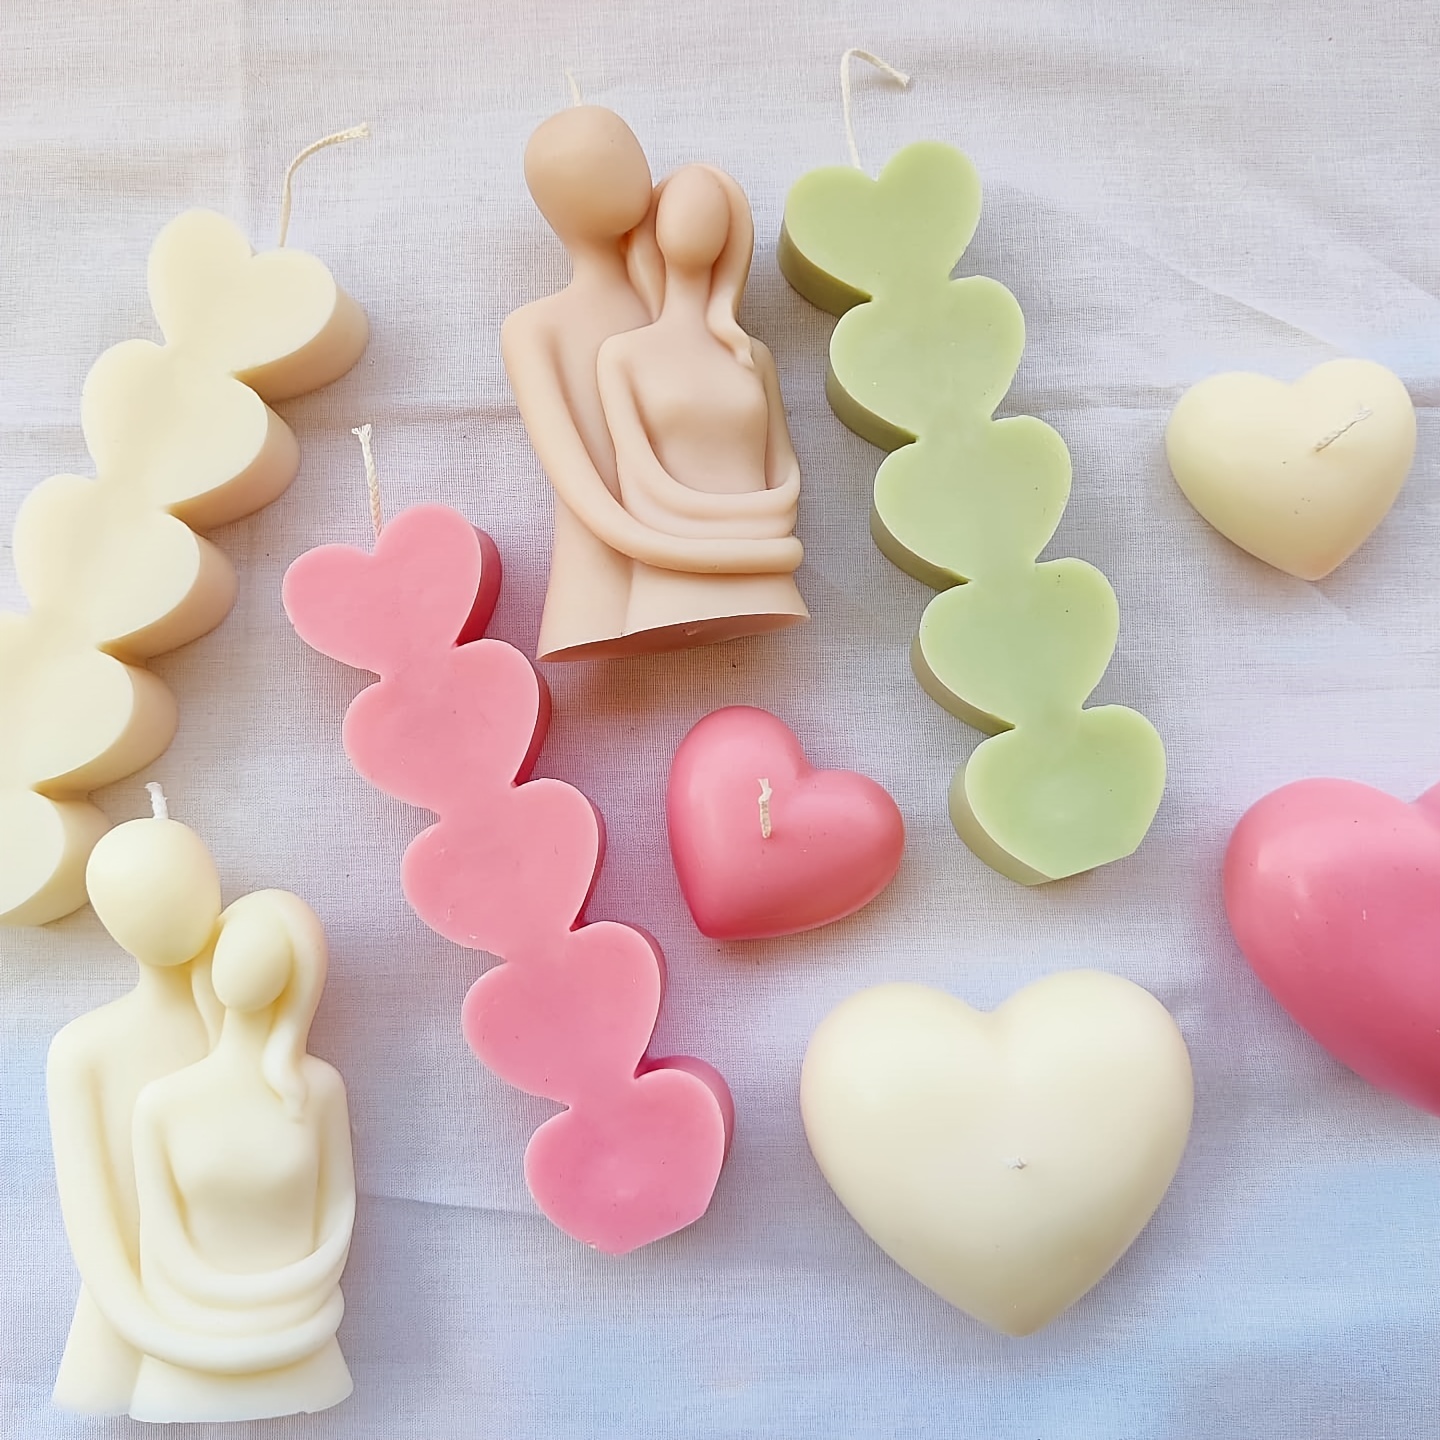 KVCSYAW 3D Heart Candle Mold, 2 Pcs Silicone Mold for Candle Making, Valentine's Day Handmade Candle Making Mould, DIY Craft Resin Mold for Fondant Cake, Arom